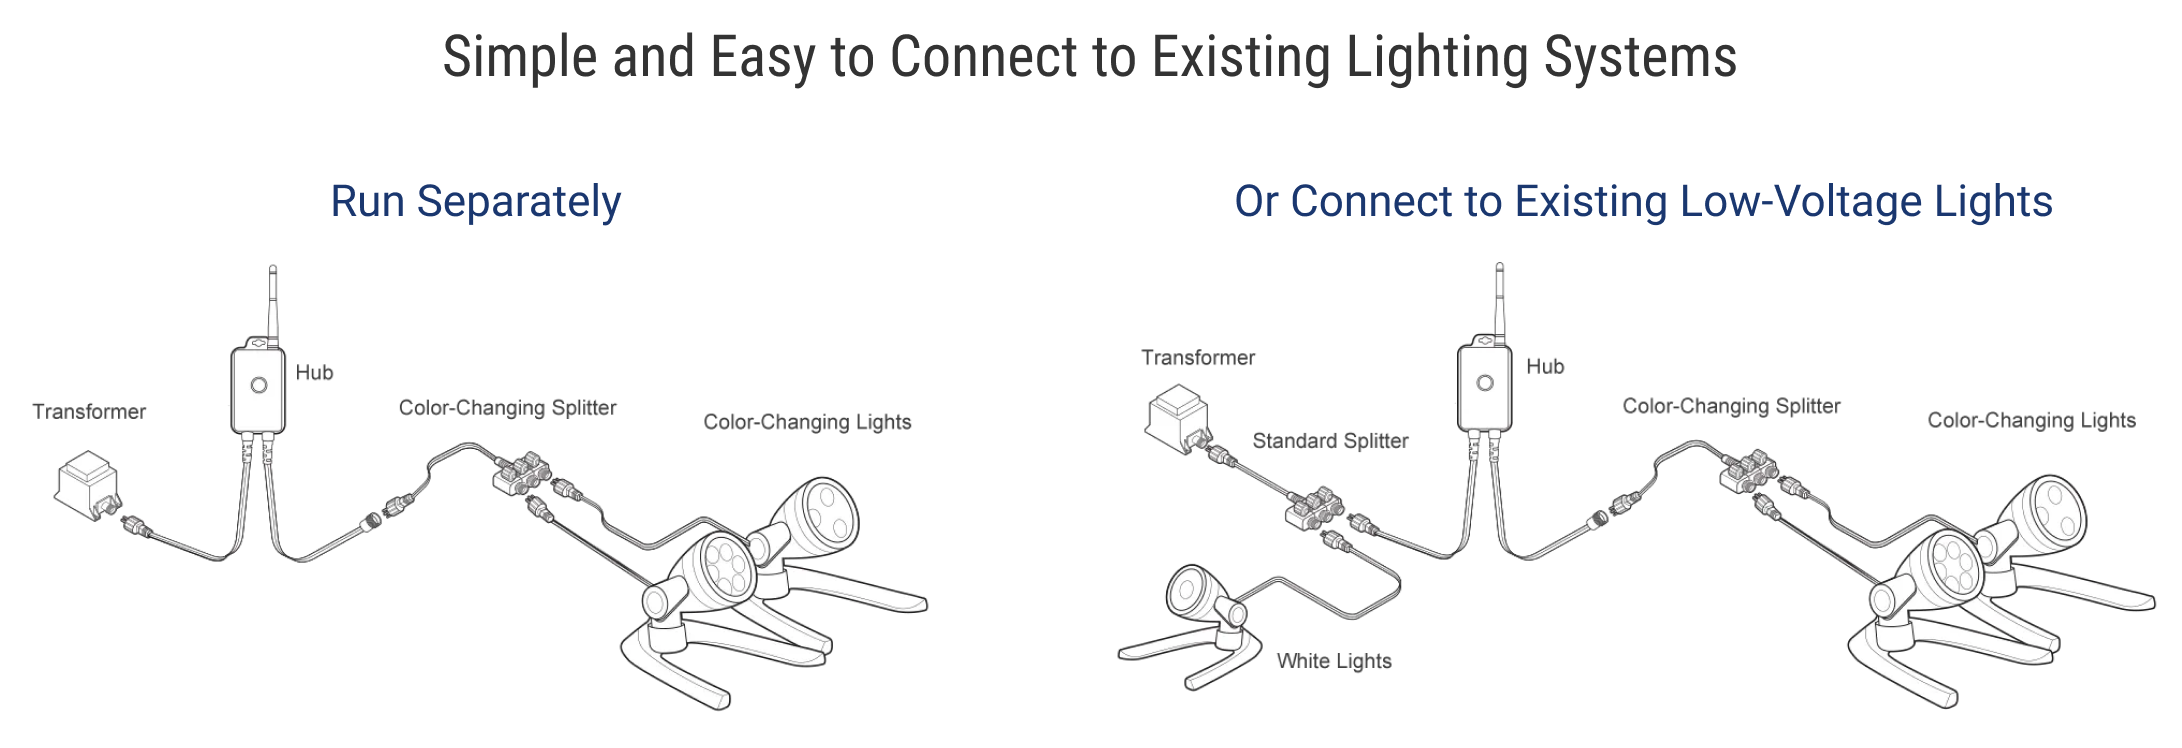 Simple and Easy to Connect to Existing Lighting Systems